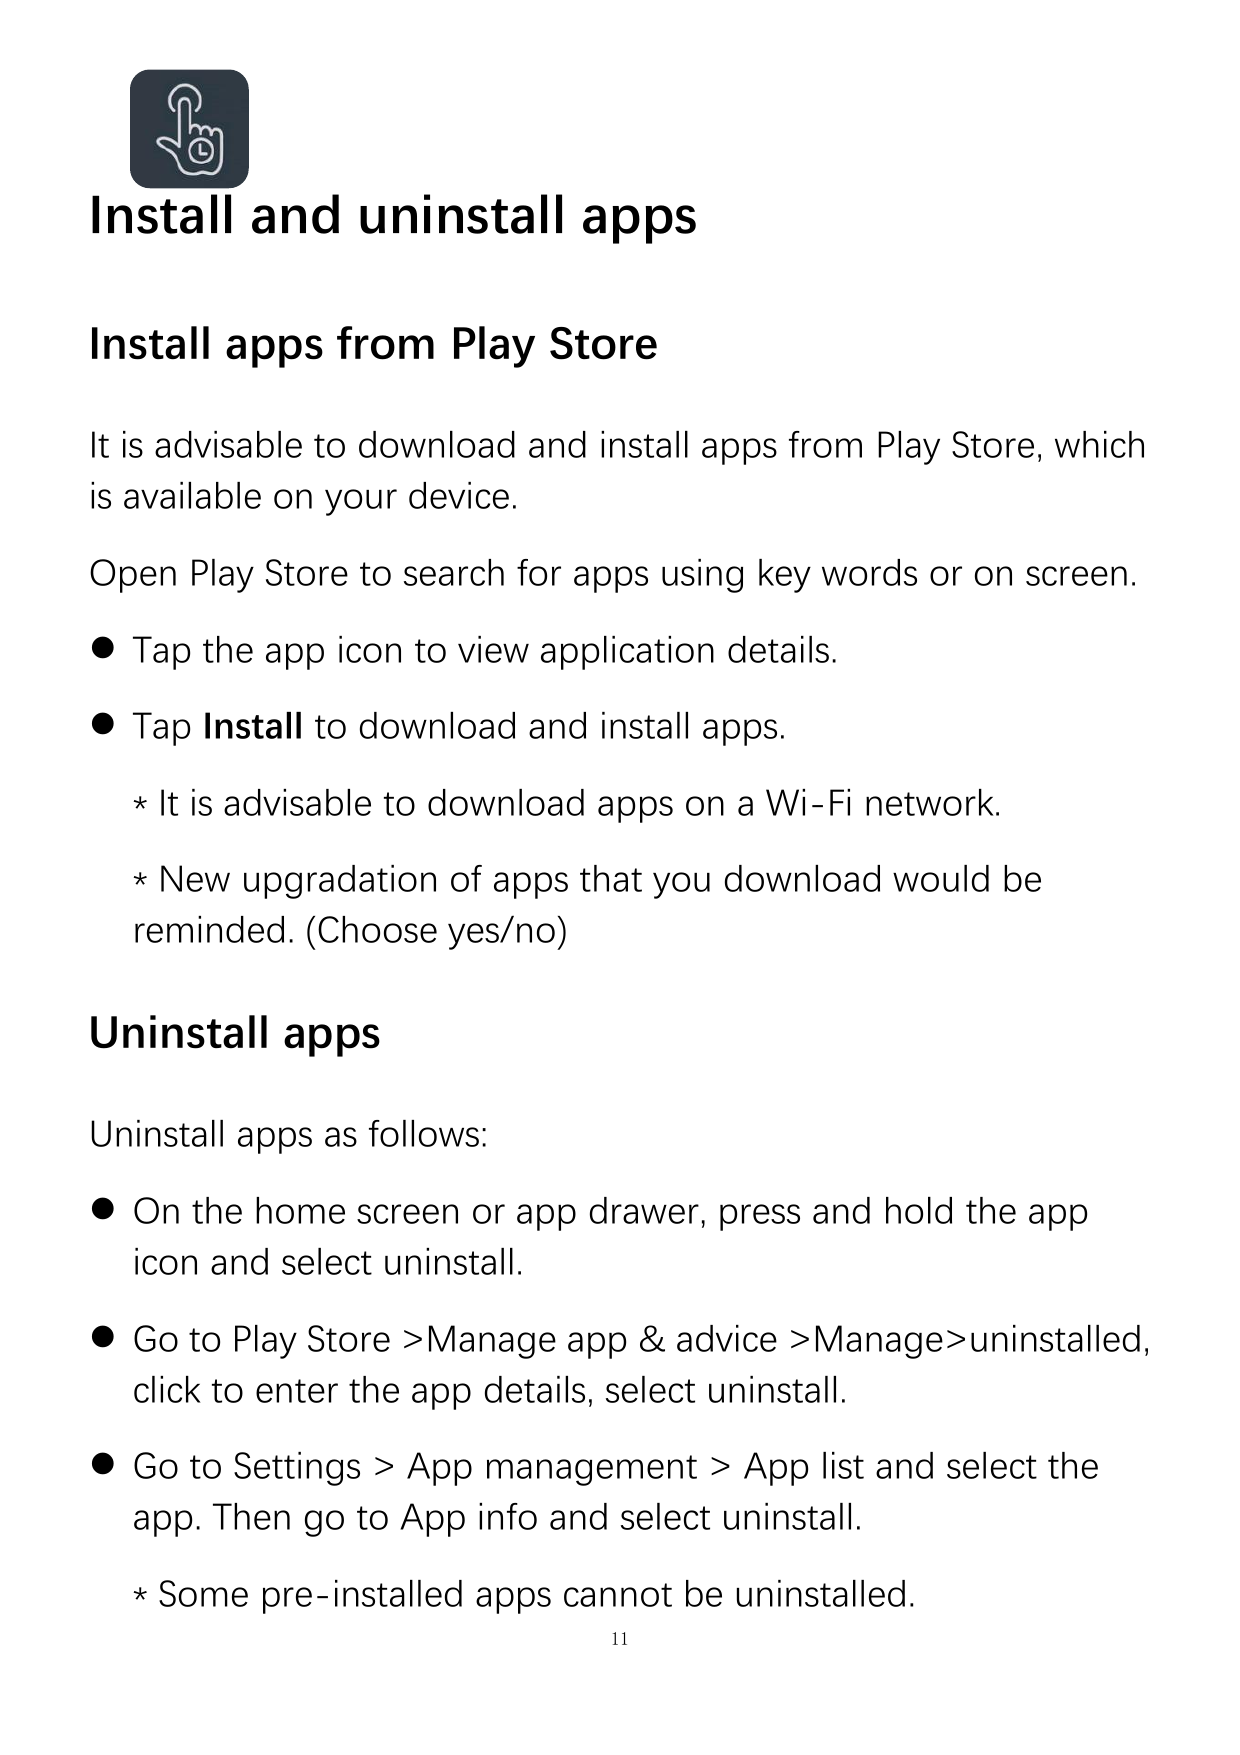 Install and uninstall appsInstall apps from Play StoreIt is advisable to download and install apps from Play Store, whichis avai